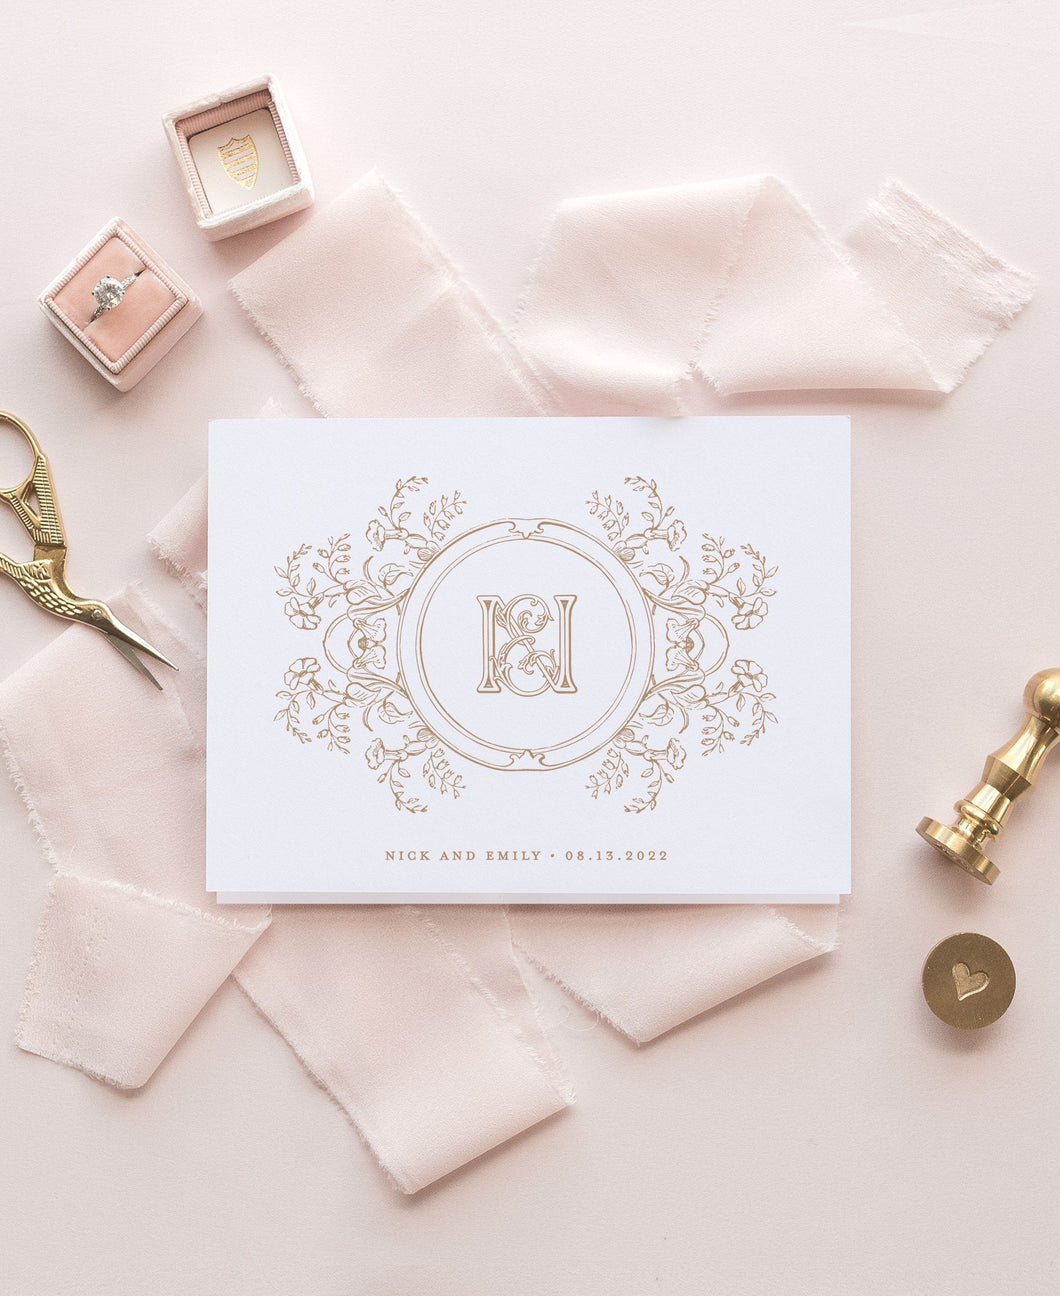 Annabelle thank you cards